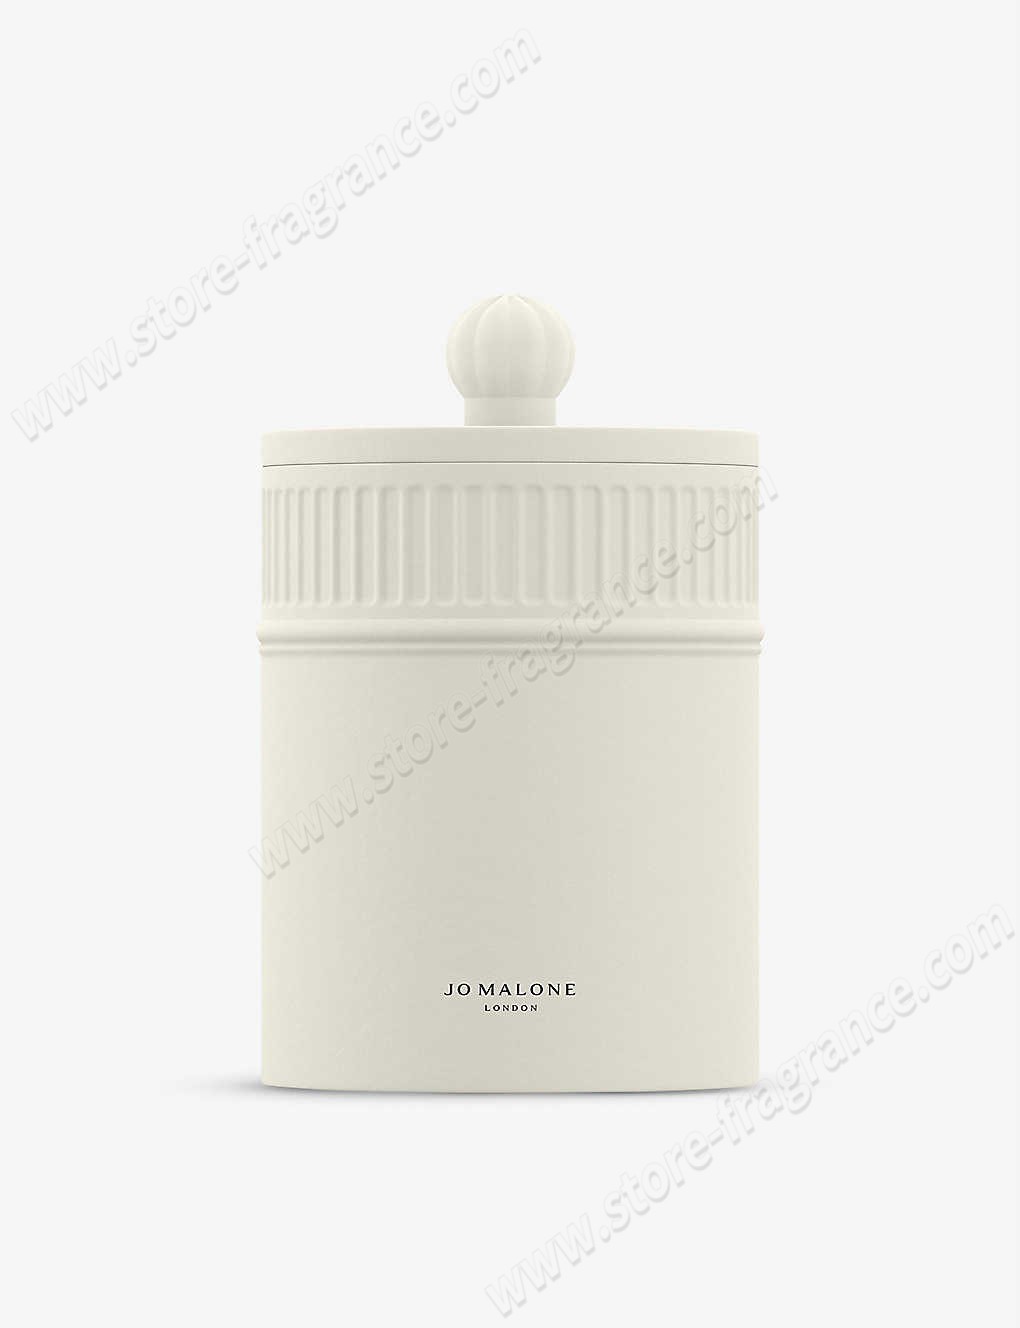 JO MALONE LONDON/Fresh Fig & Cassis scented candle 300g ✿ Discount Store - JO MALONE LONDON/Fresh Fig & Cassis scented candle 300g ✿ Discount Store